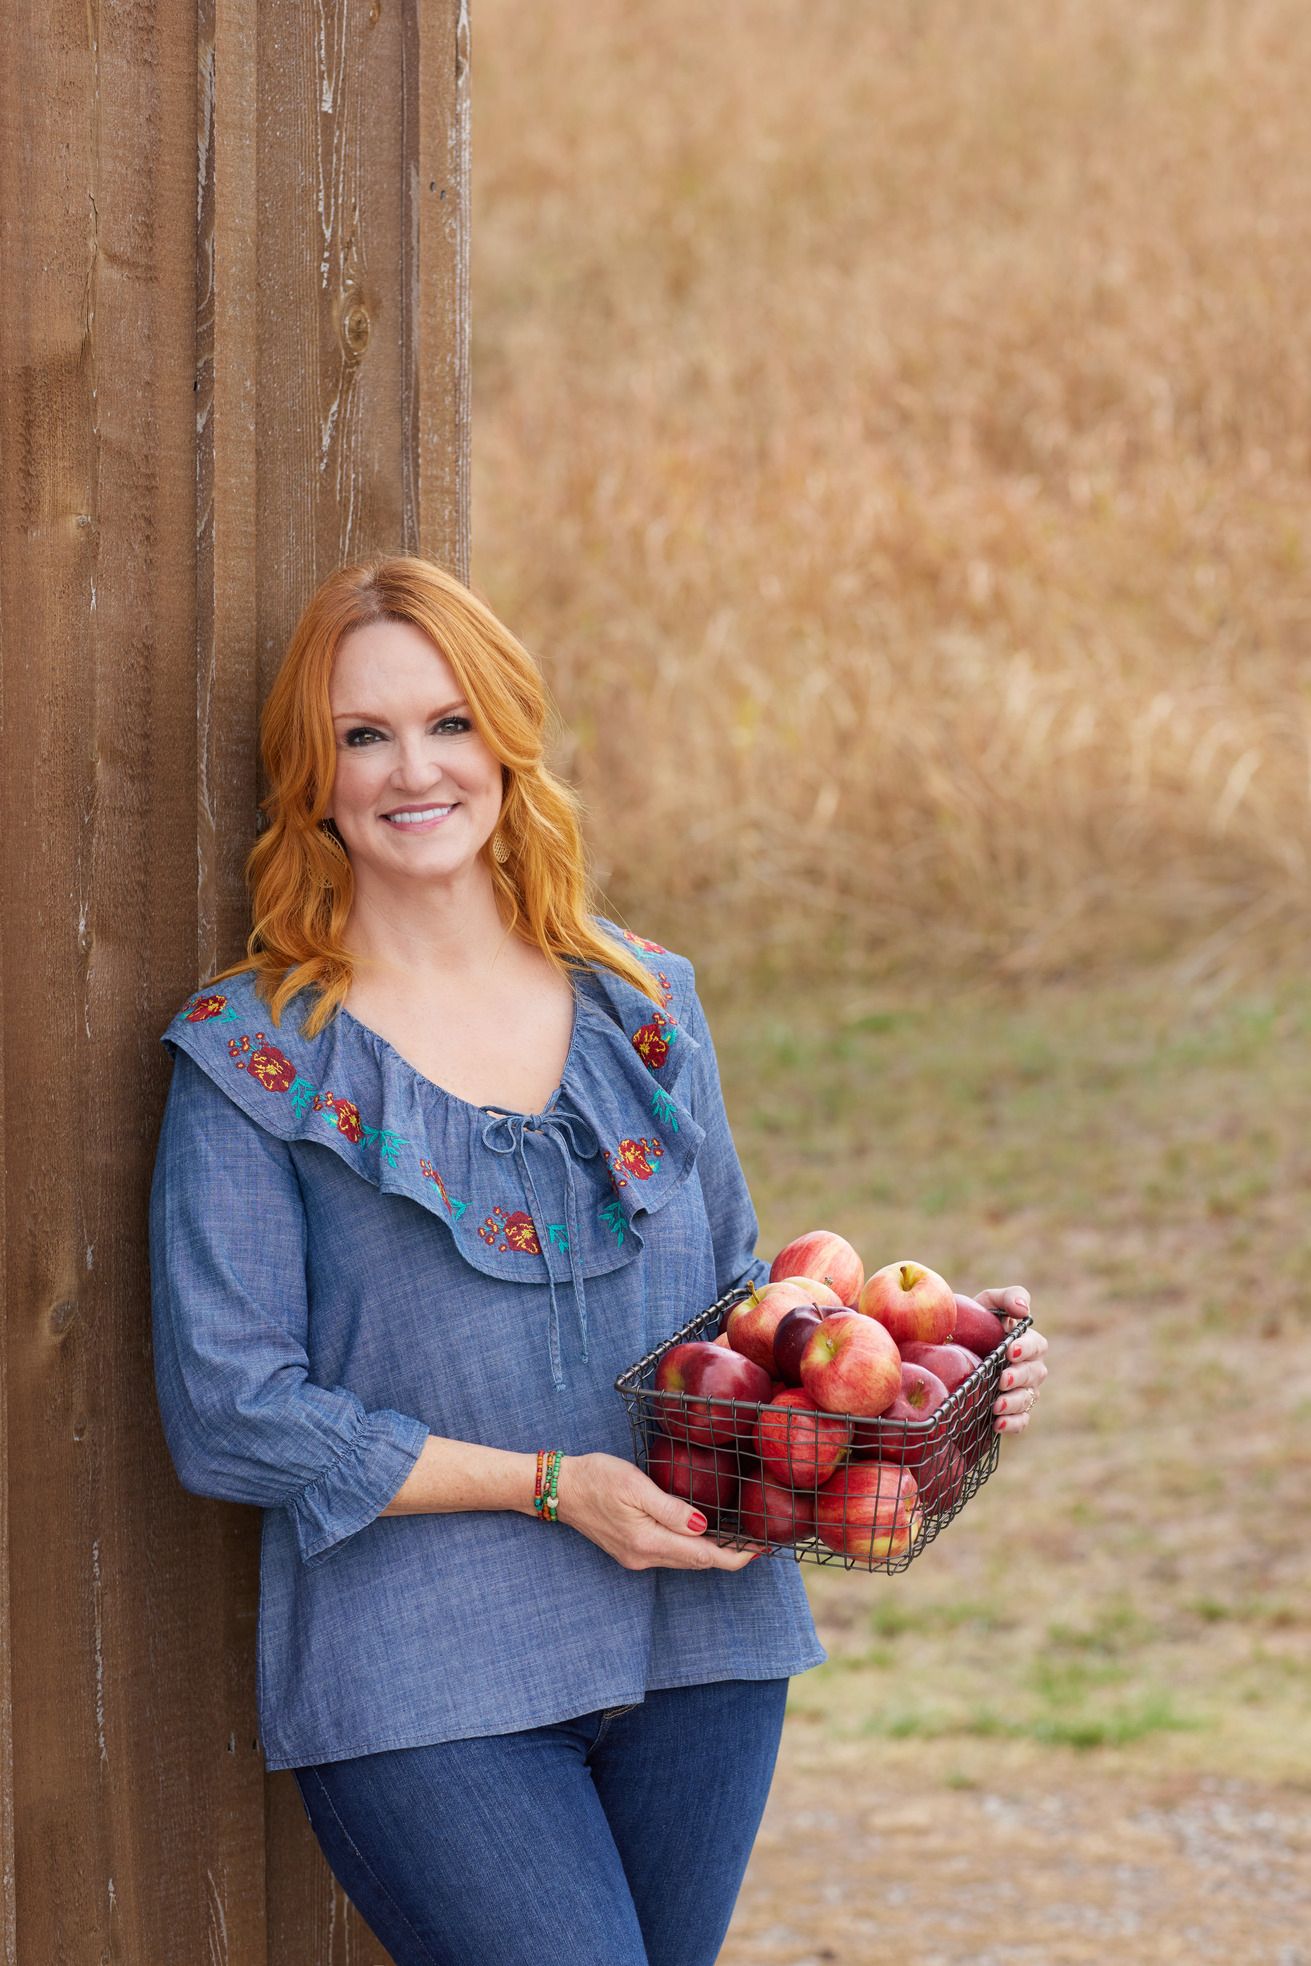 Shop Ree Drummond's Look from 'The Pioneer Woman Magazine' Fall